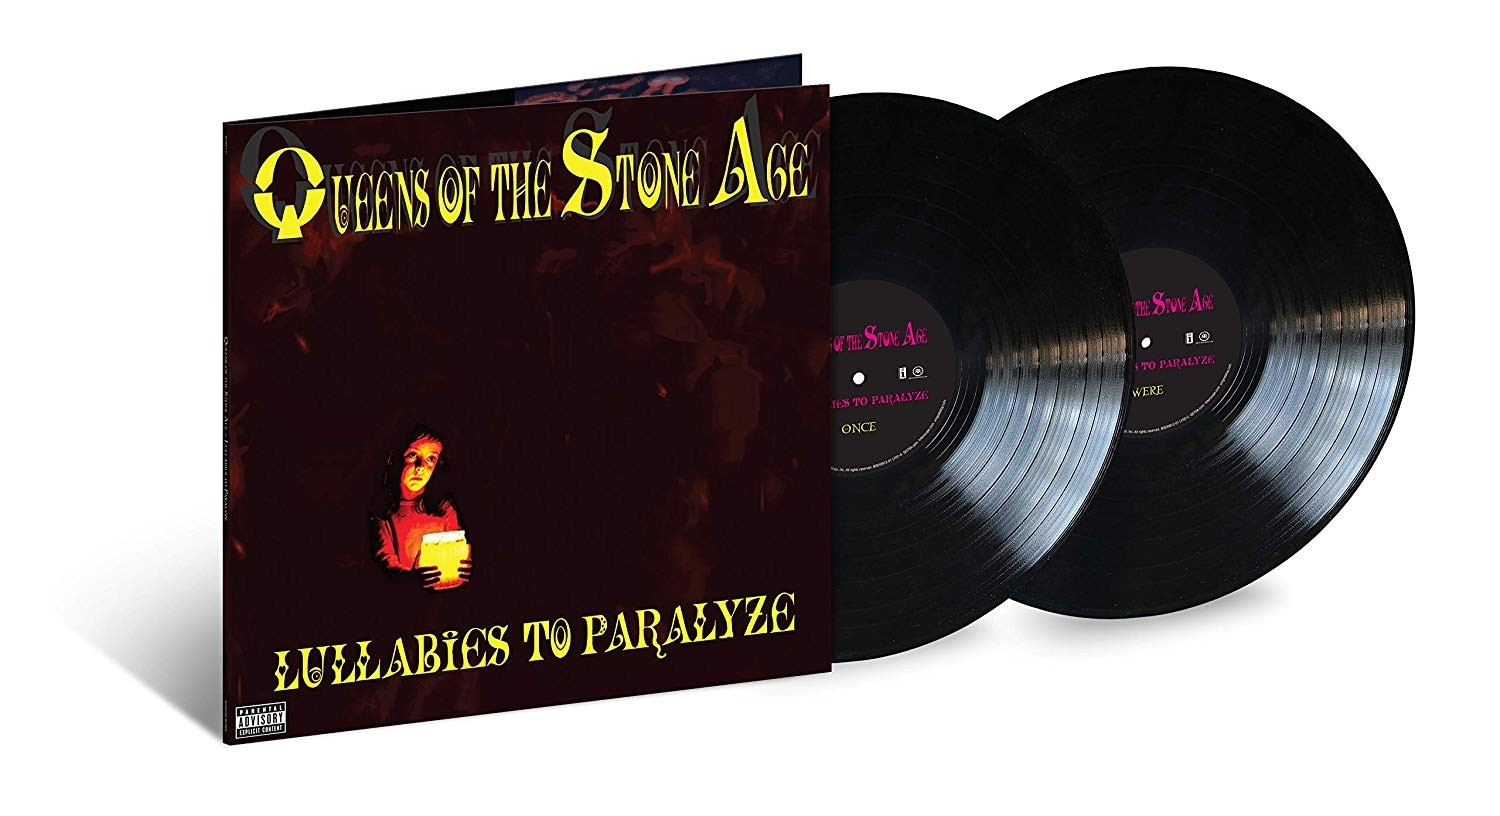 Queens of the Stone Age - Lullabies To Paralyze 2XLP